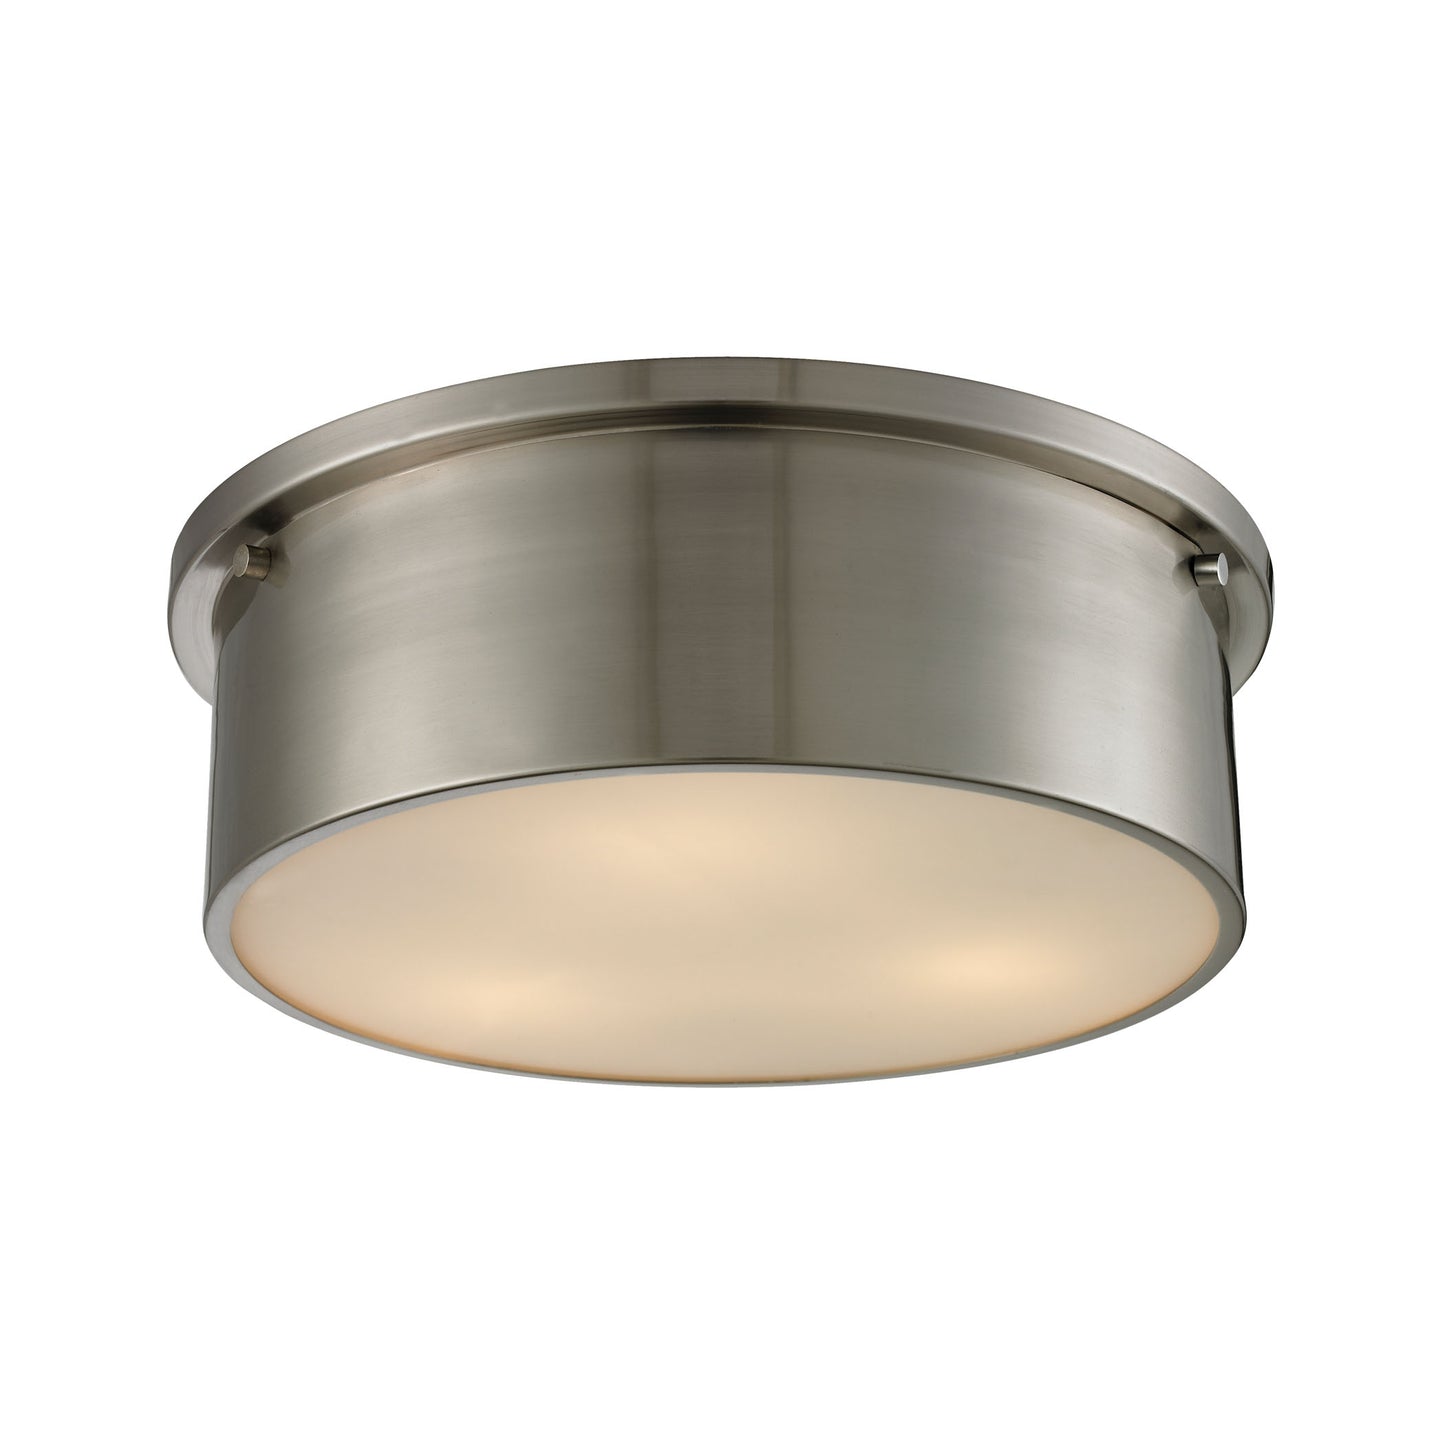 ELK Lighting 11821/3 - Simpson 14" Wide 3-Light Flush Mount in Brushed Nickel with Frosted White Dif